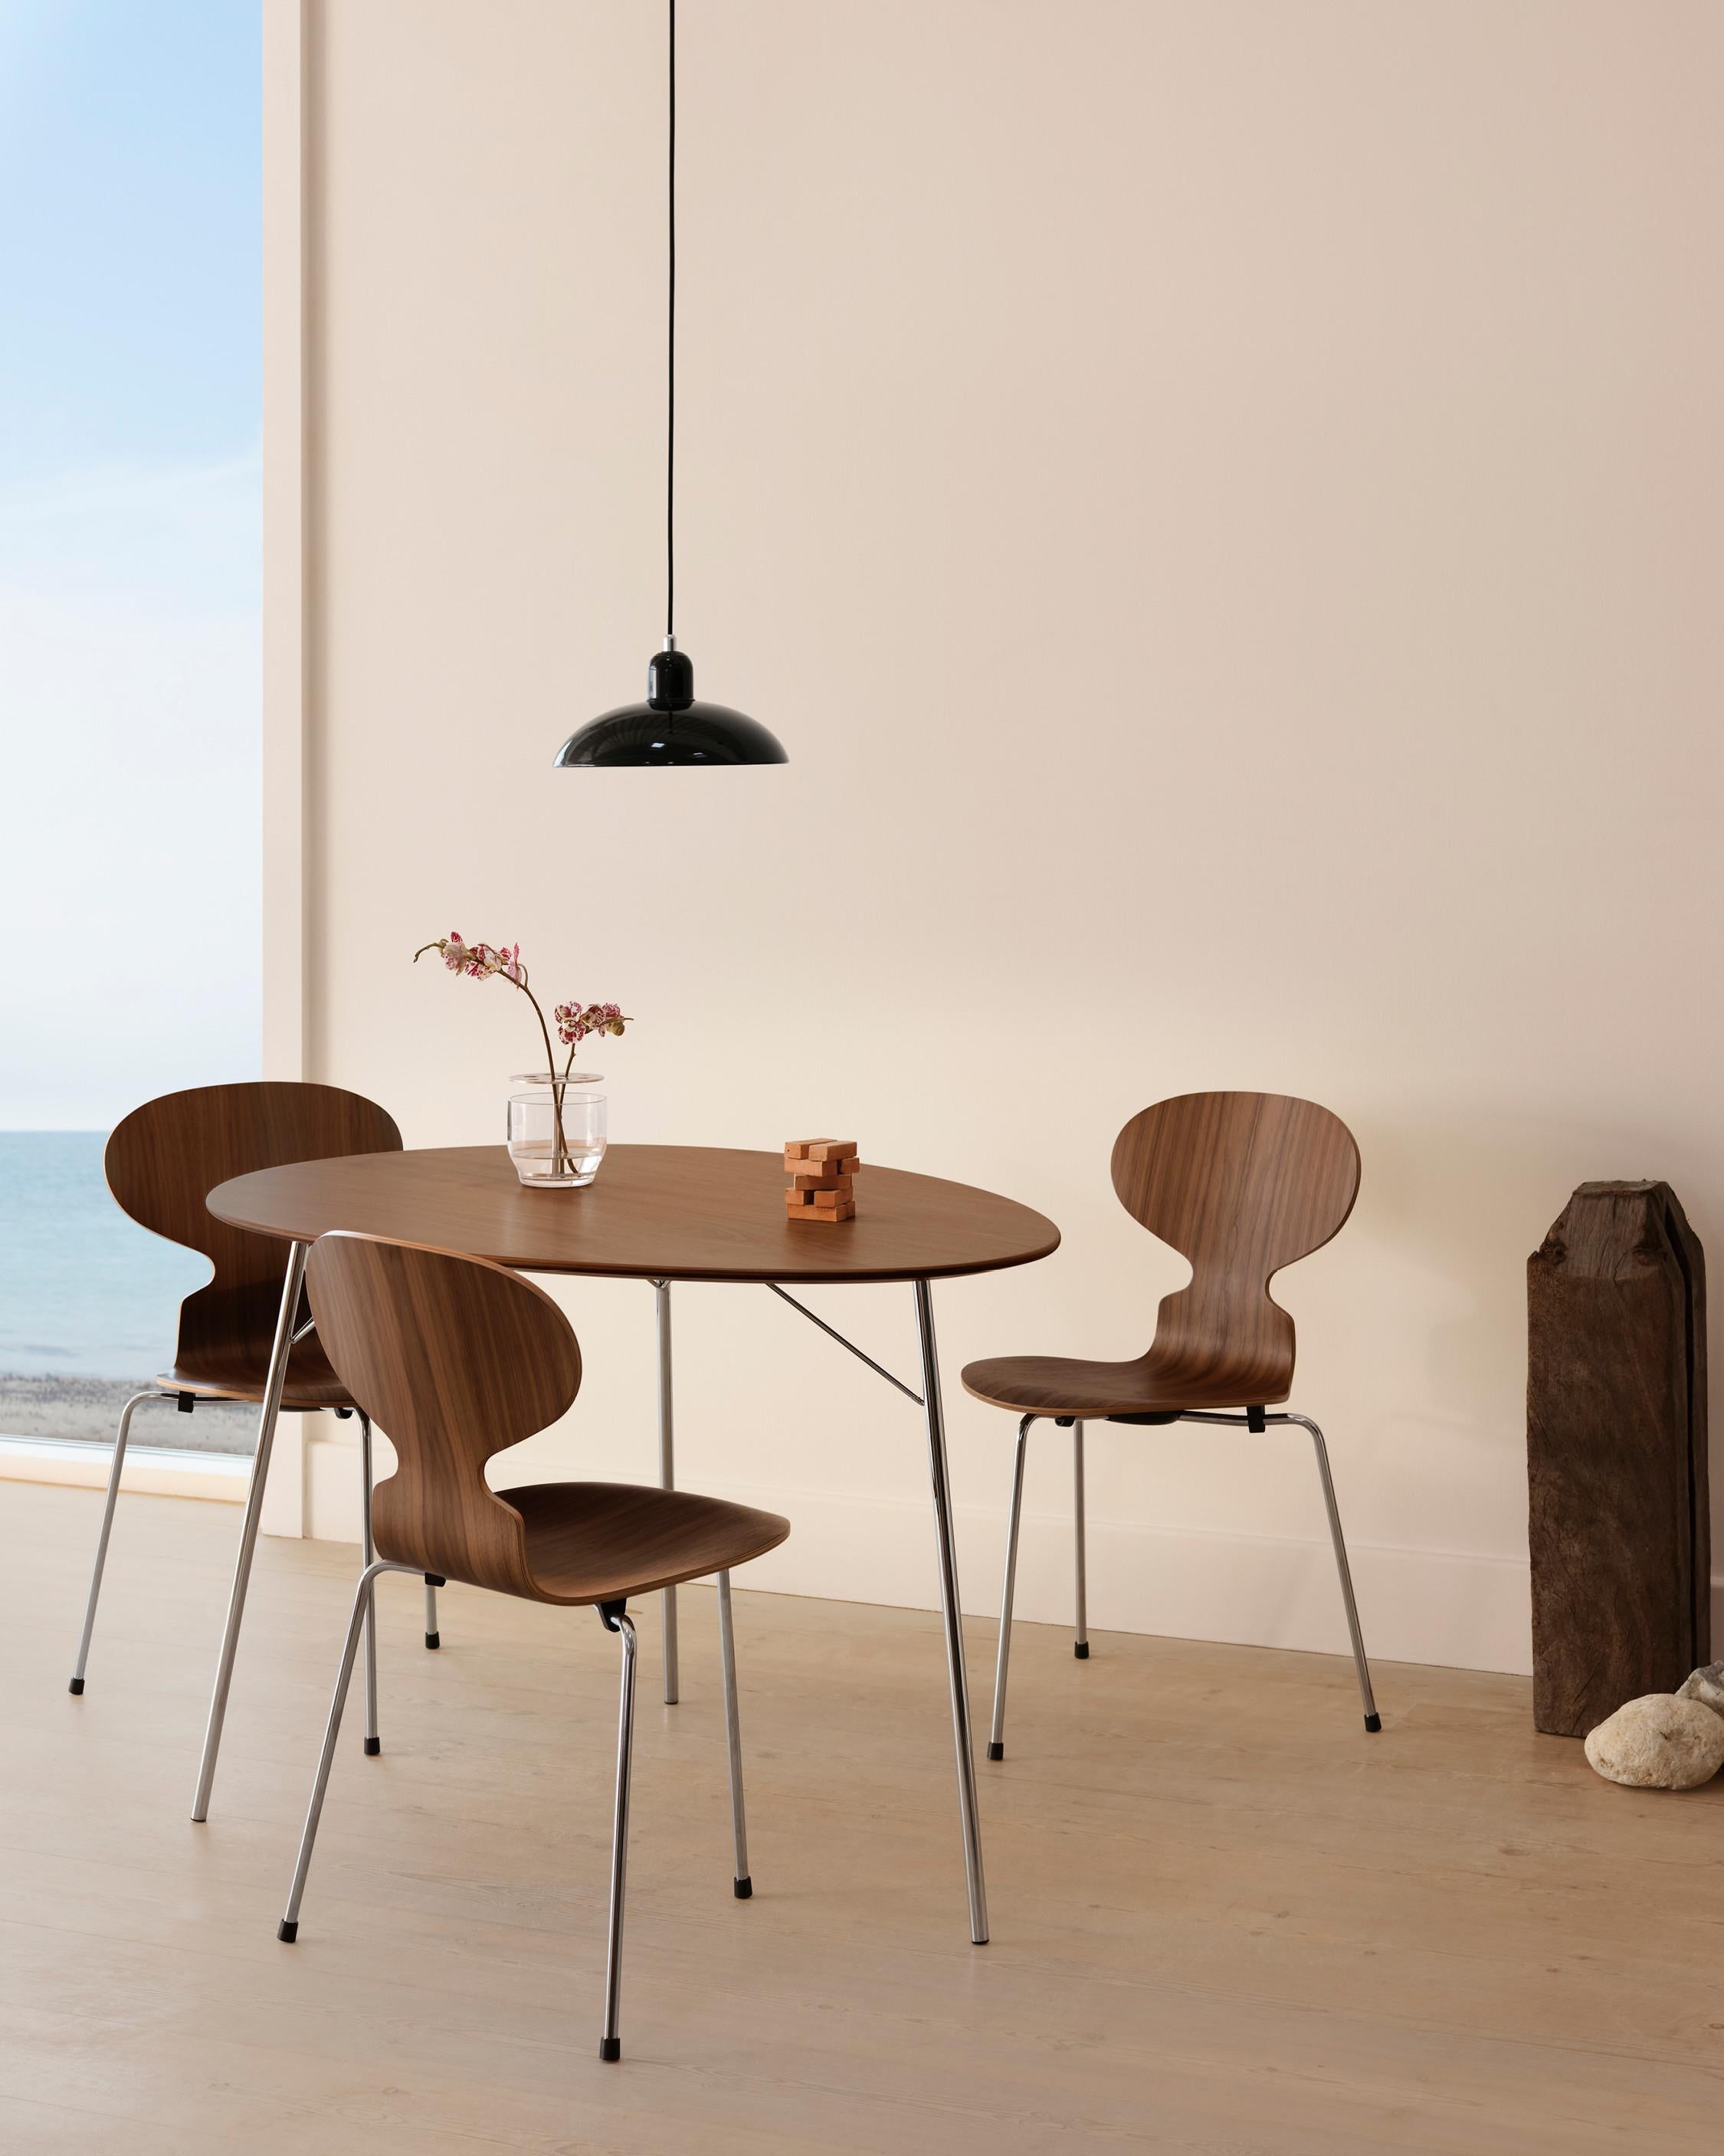 Christian Dell 'Kaiser Idell 6631-P' Pendant for Fritz Hansen in Gloss Black.

 Established in 1872, Fritz Hansen has become synonymous with legendary Danish design. Combining timeless craftsmanship with an emphasis on sustainability, the brand’s